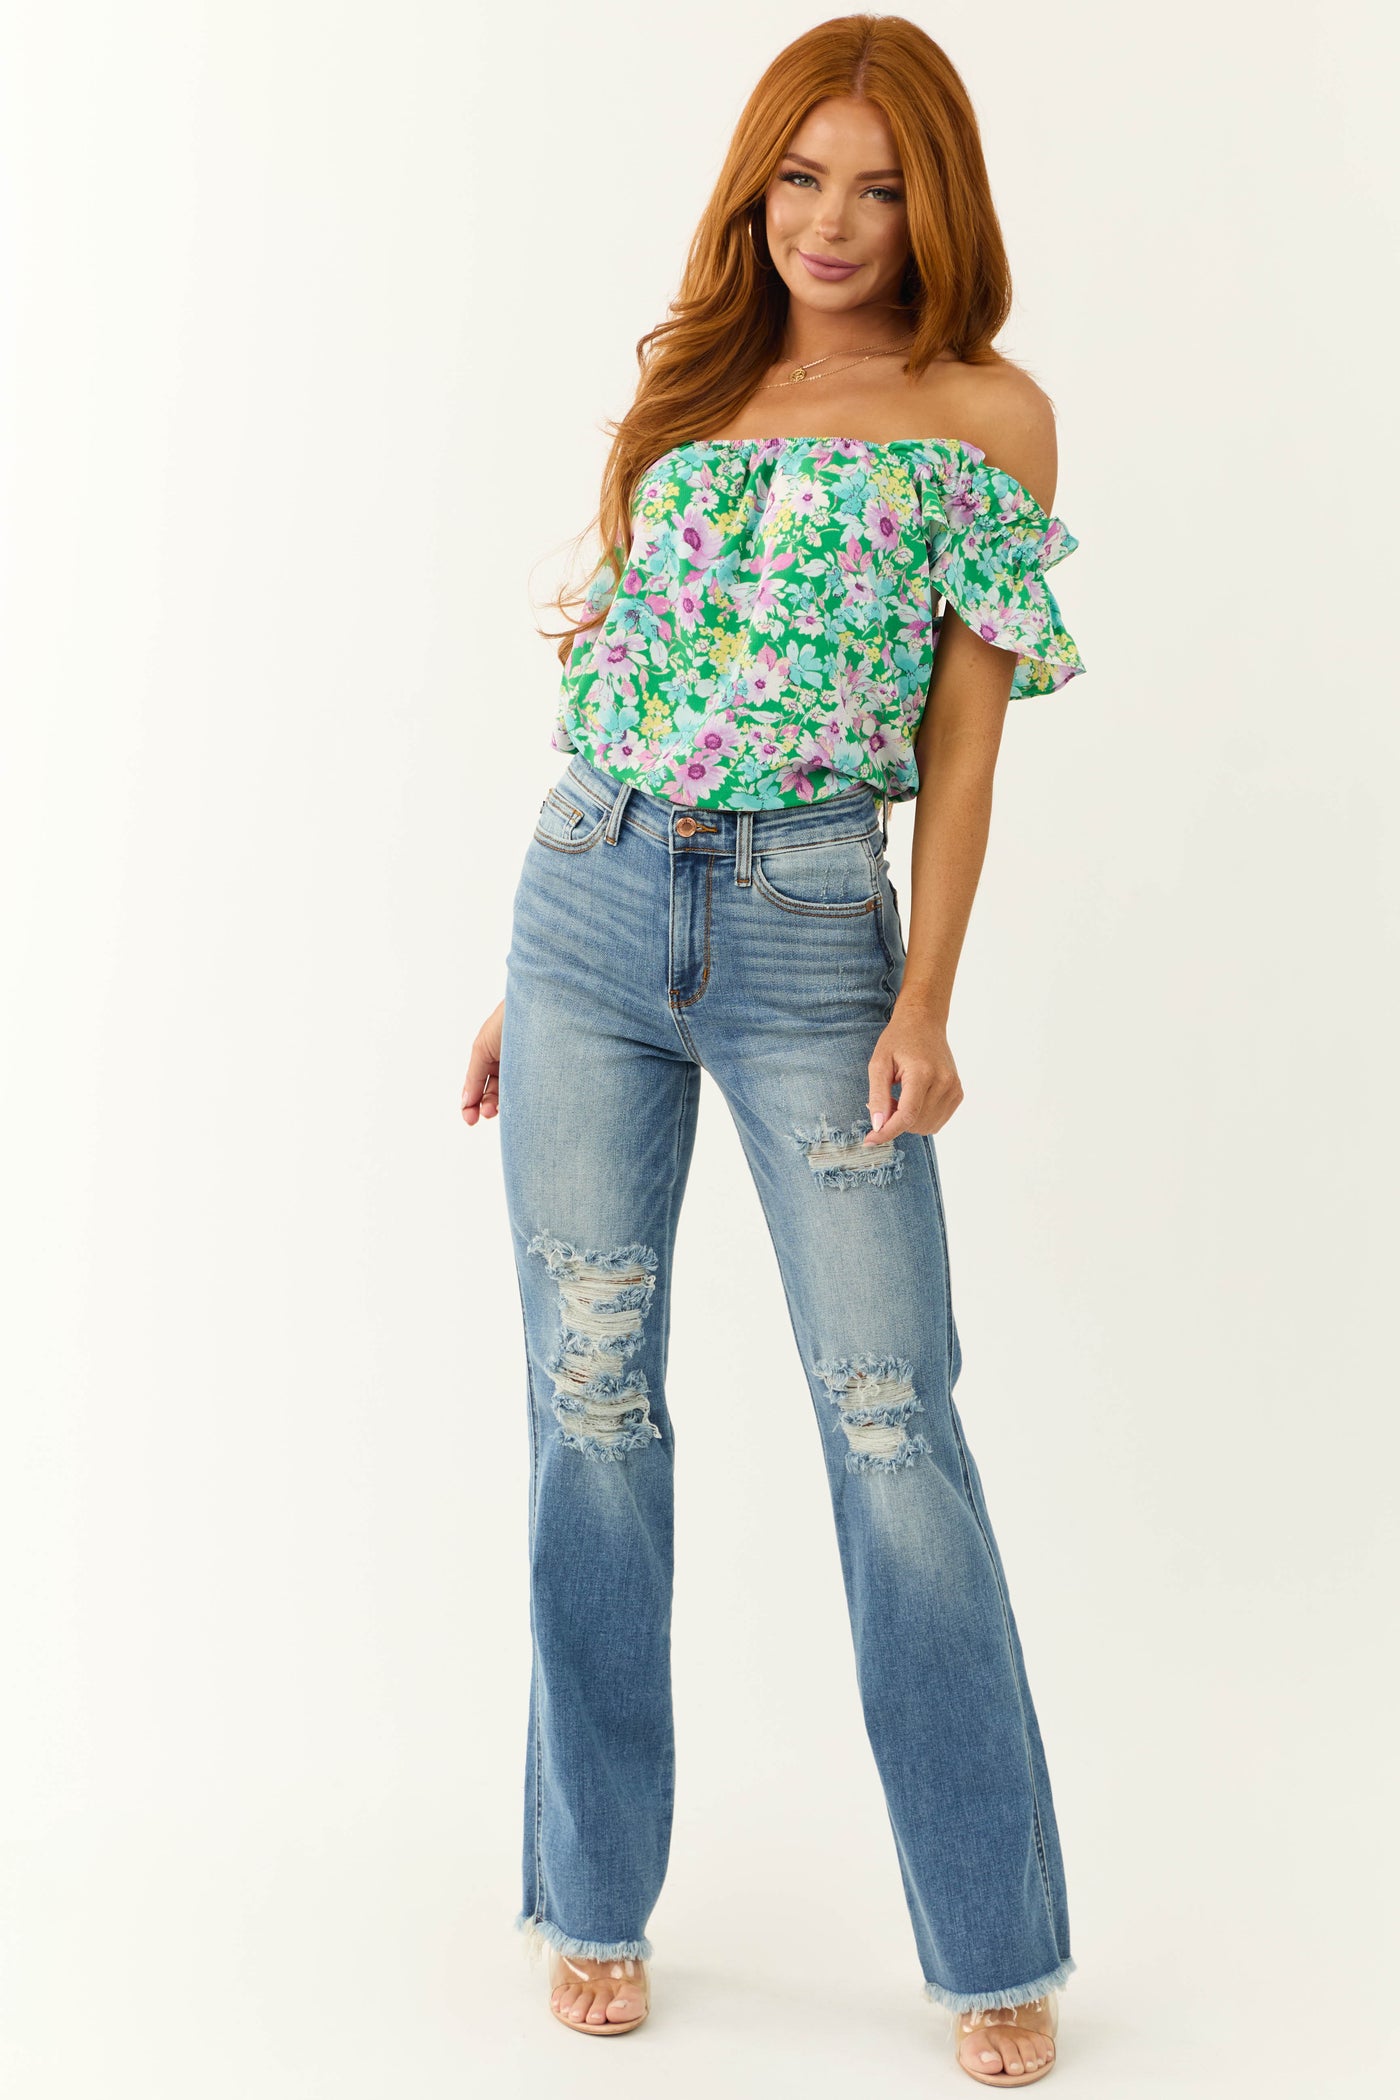 Kelly Green Floral Print Square Neck Blouse